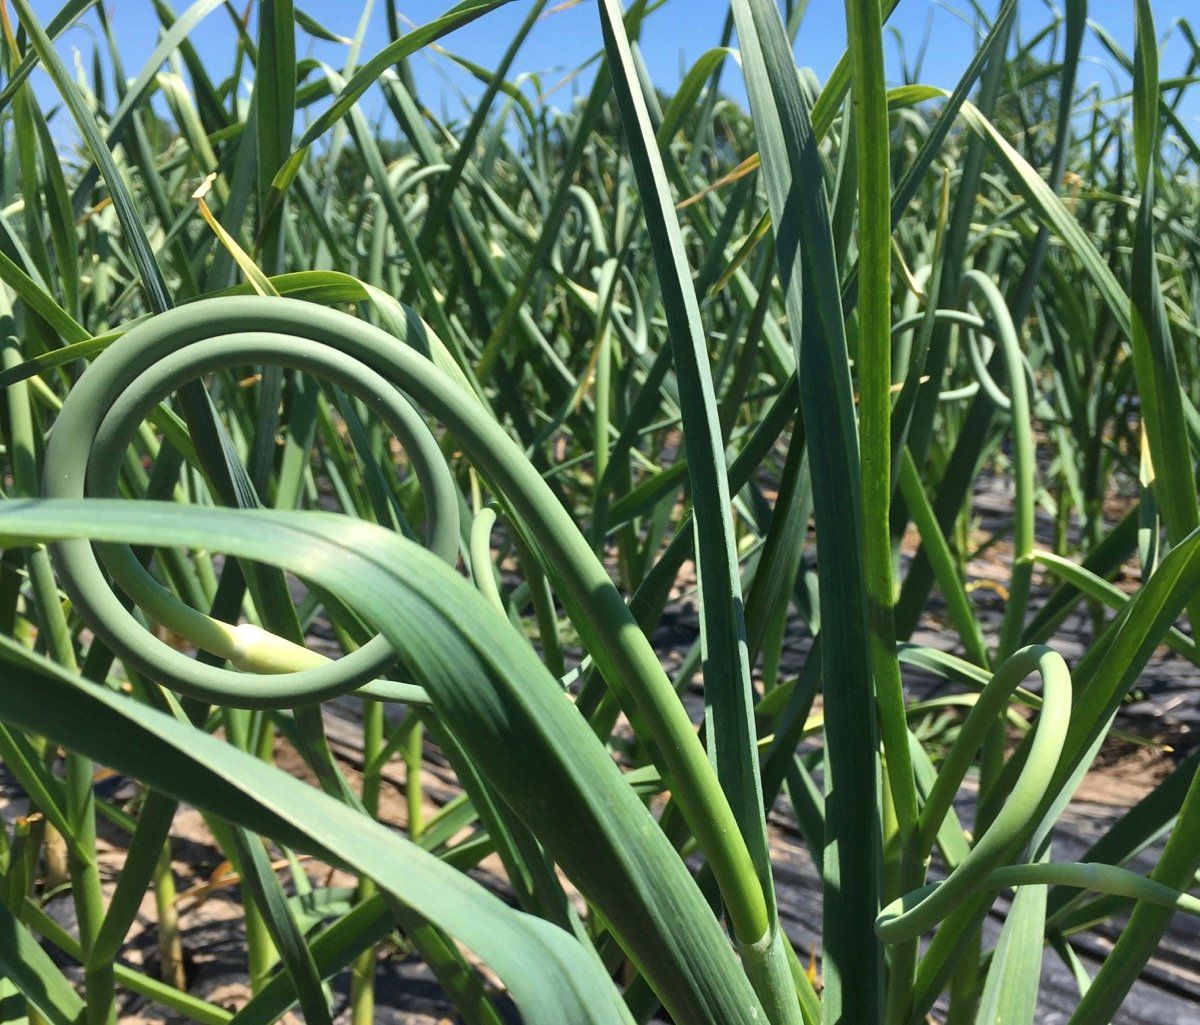 Previous Happening: Growing great ~ Pick up tips ~ Garlic Scapes